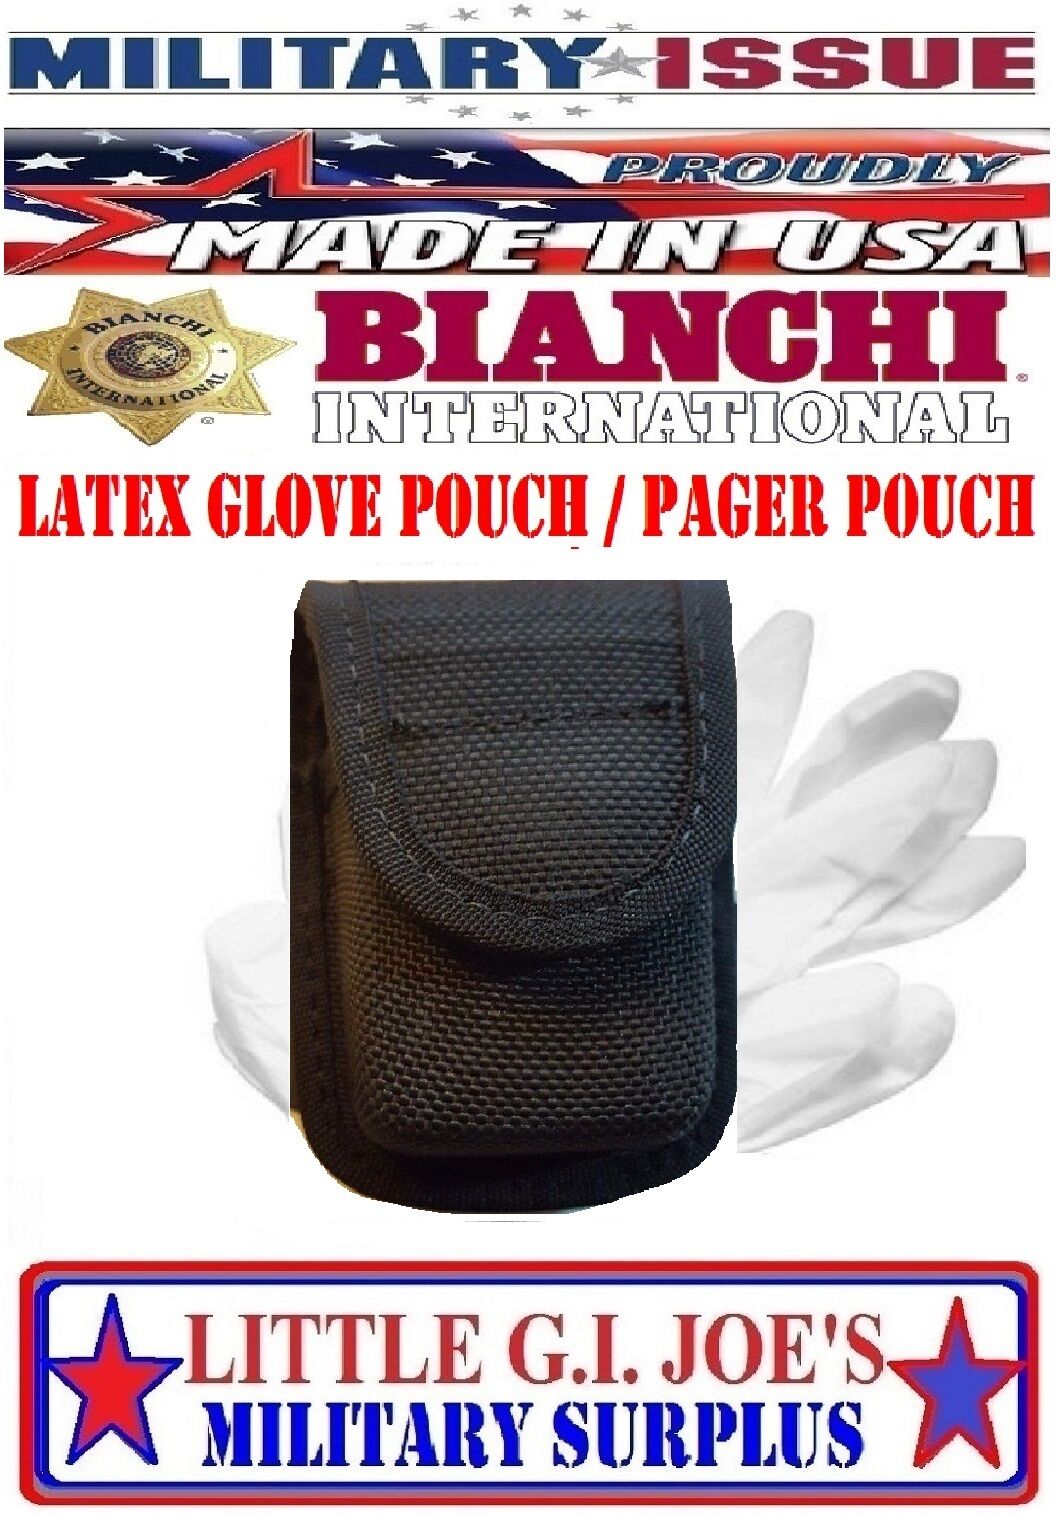 Bianchi 18481 Accumold Pager Pouch / Emt Latex Glove Pouch 7315